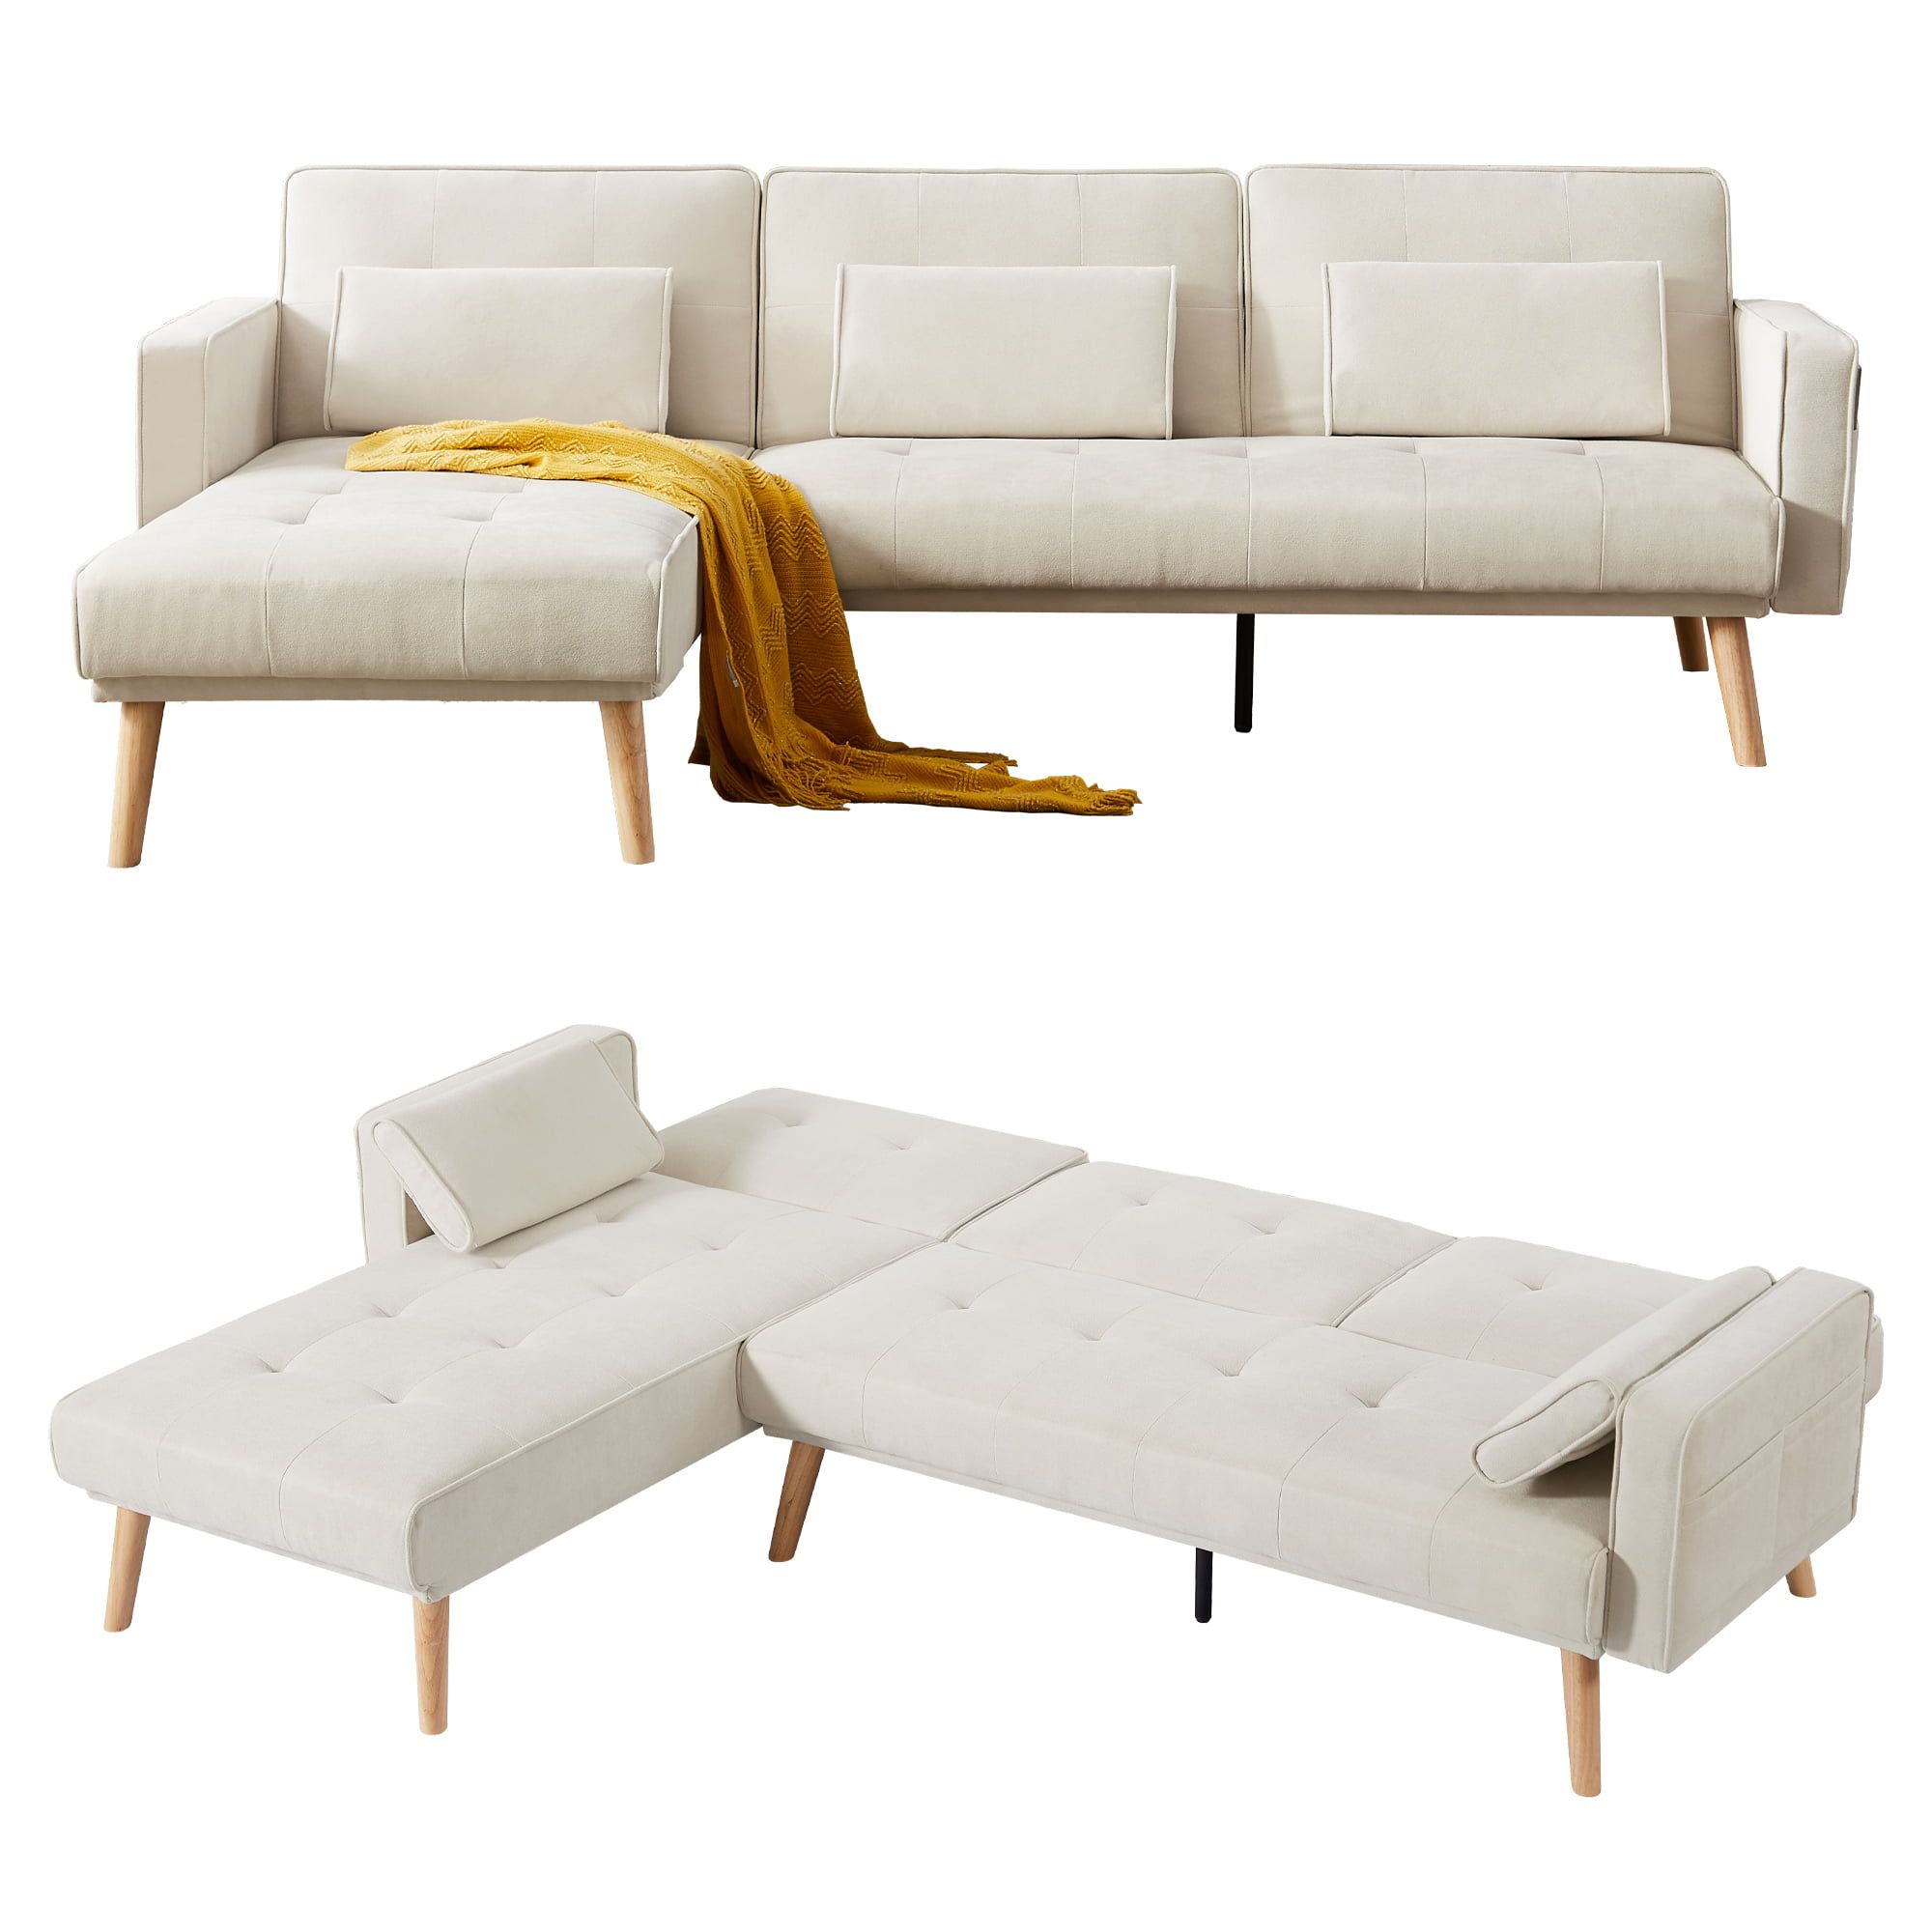 Zechuan Sectional Convertible Sofa Bed With Left Chaise And Pillows –  L Shaped Corner Sofa Couch – Modern Living Room Furniture Set – White –  Walmart With Regard To Sofa Beds With Right Chaise And Pillows (View 18 of 20)